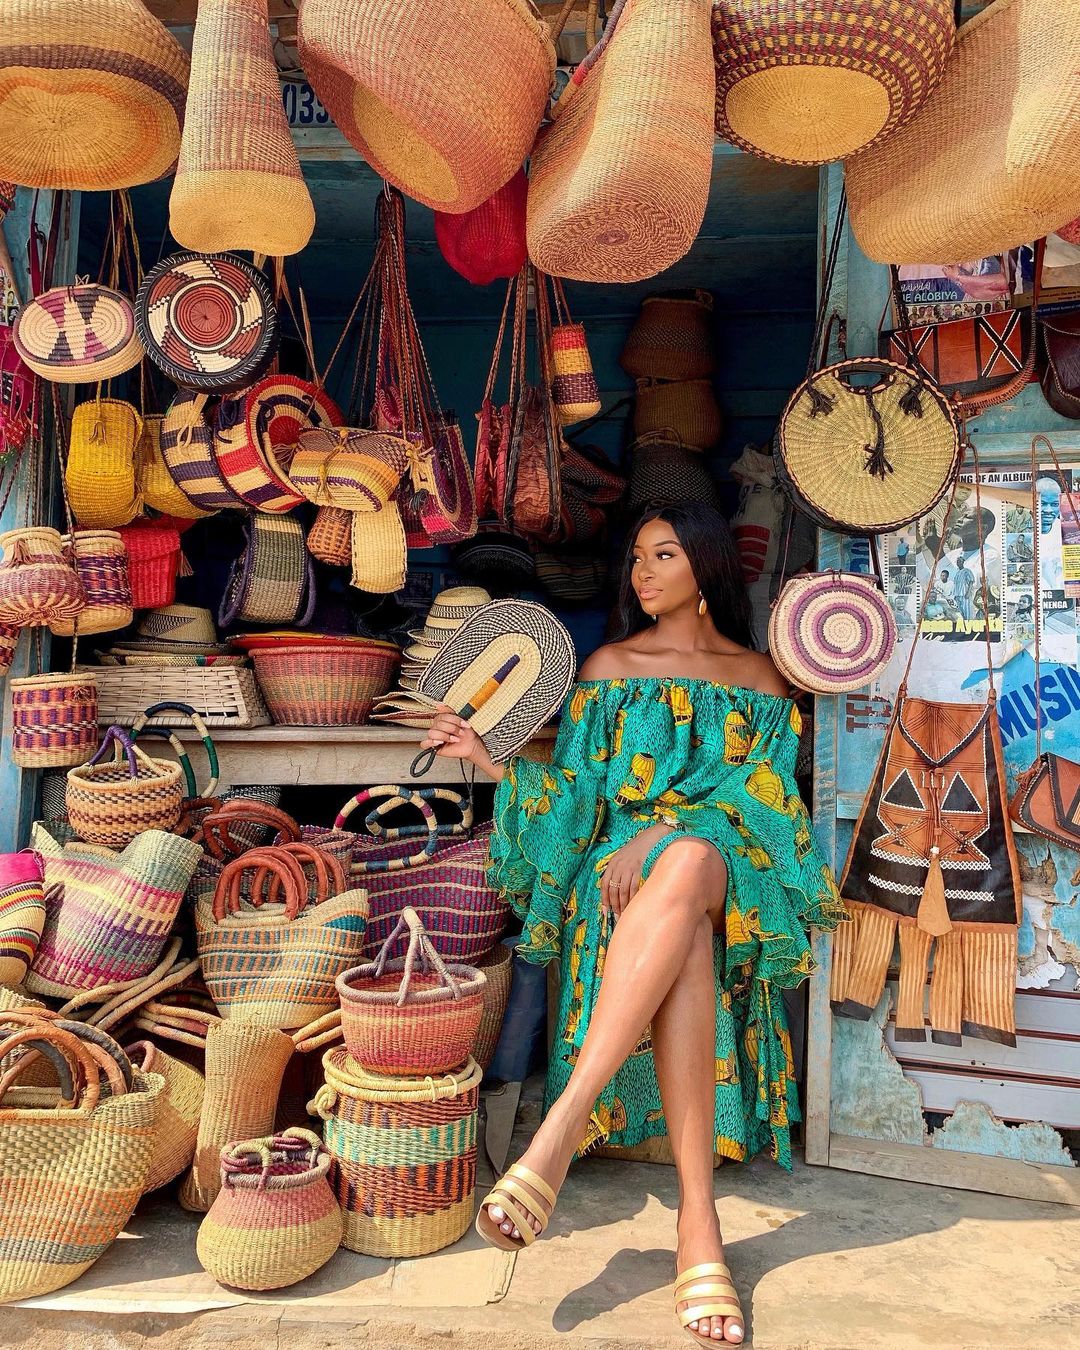 accra Arts and crafts market